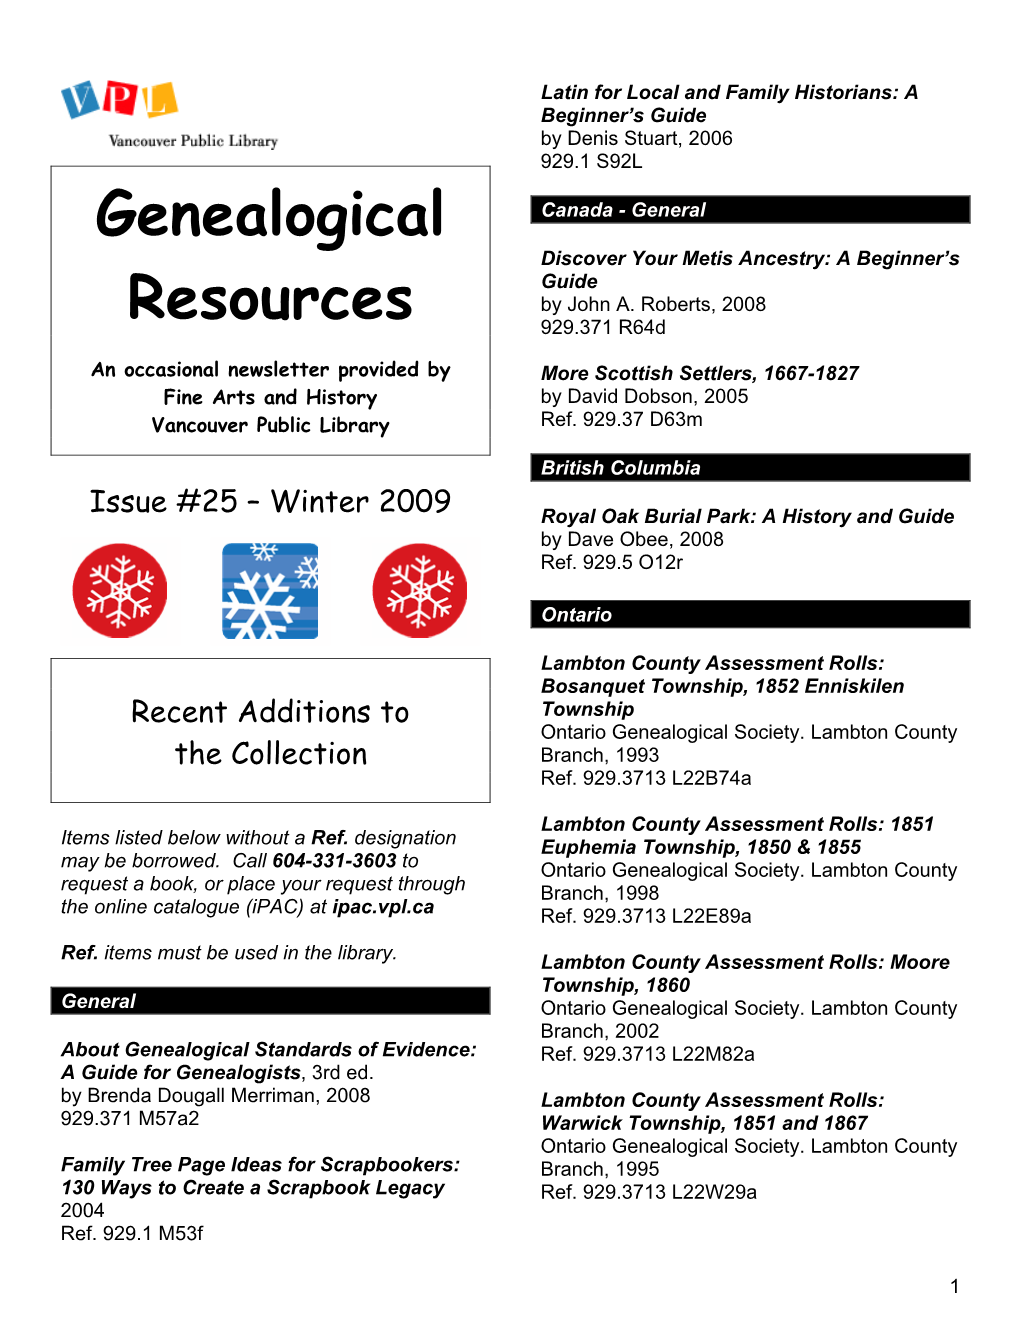 Genealogical Resources Newsletter Is a Free Publication of Fine Arts and History, and Is Distributed in Print and by E-Mail